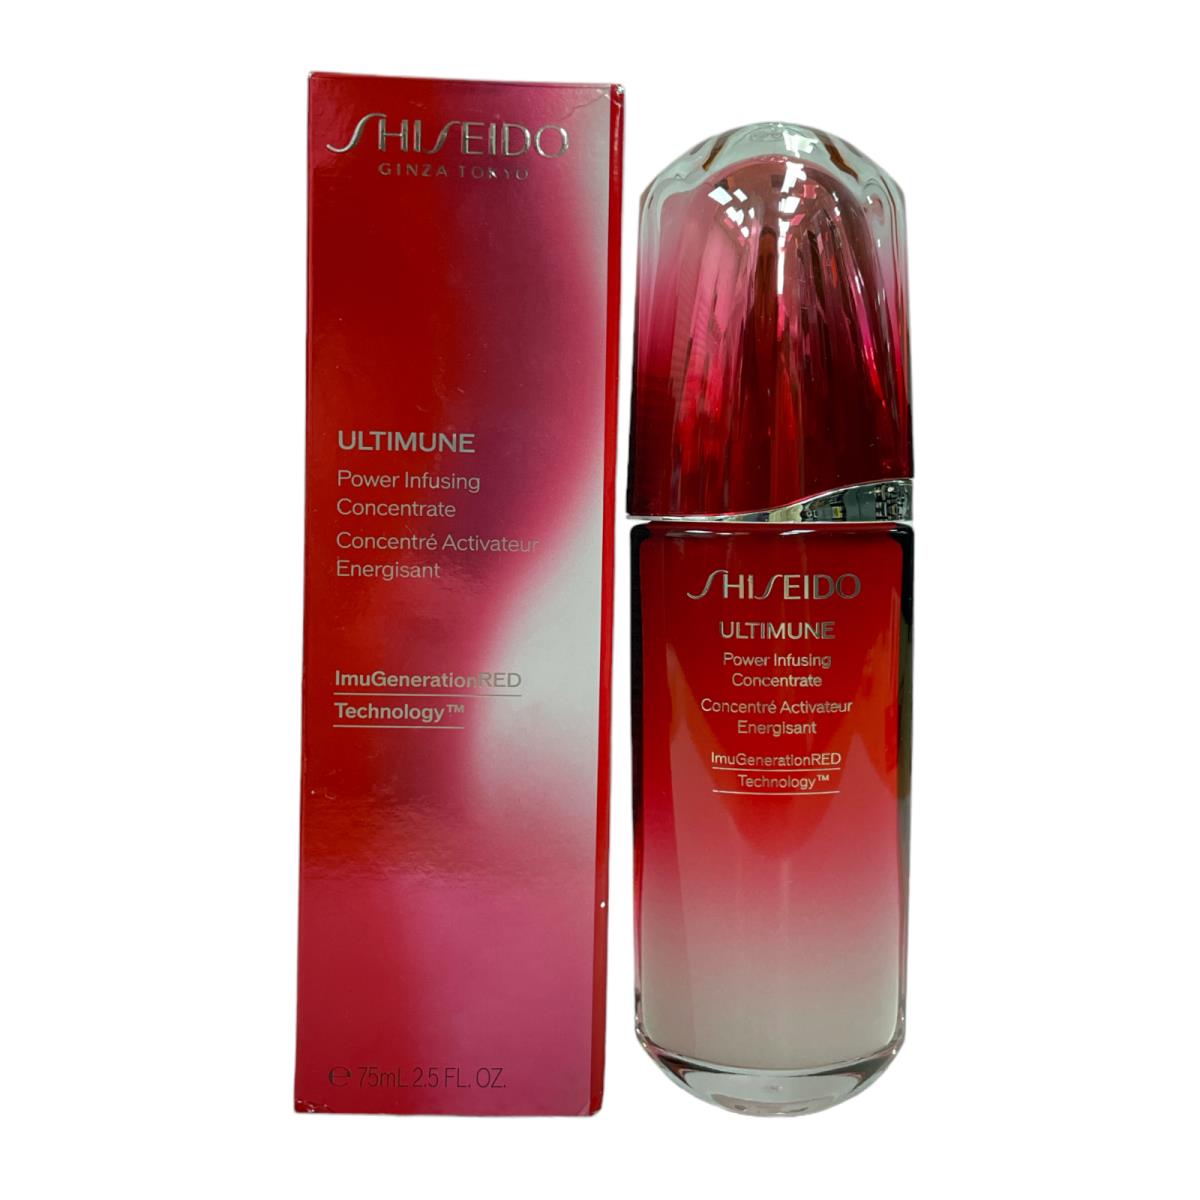 Shiseido Ultimune Power Infusing Concentrate 75ml/2.5fl As Seen In Pics